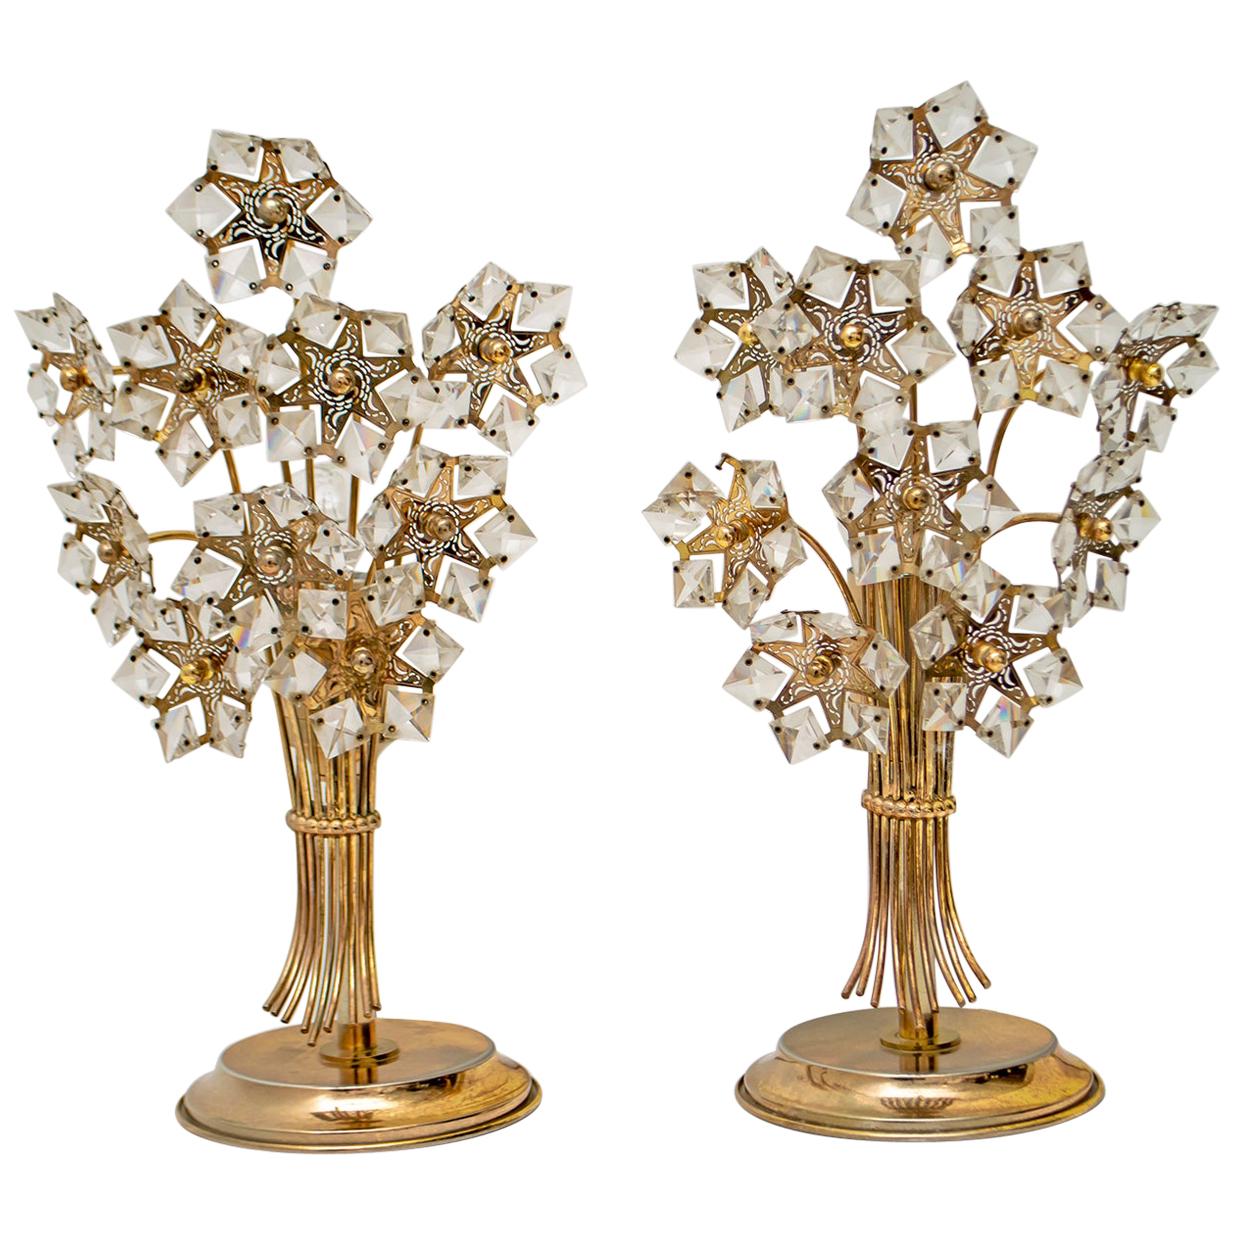 Pair of Mid-20th Century Italian Crystal and Brass Table Lamps, 1960s